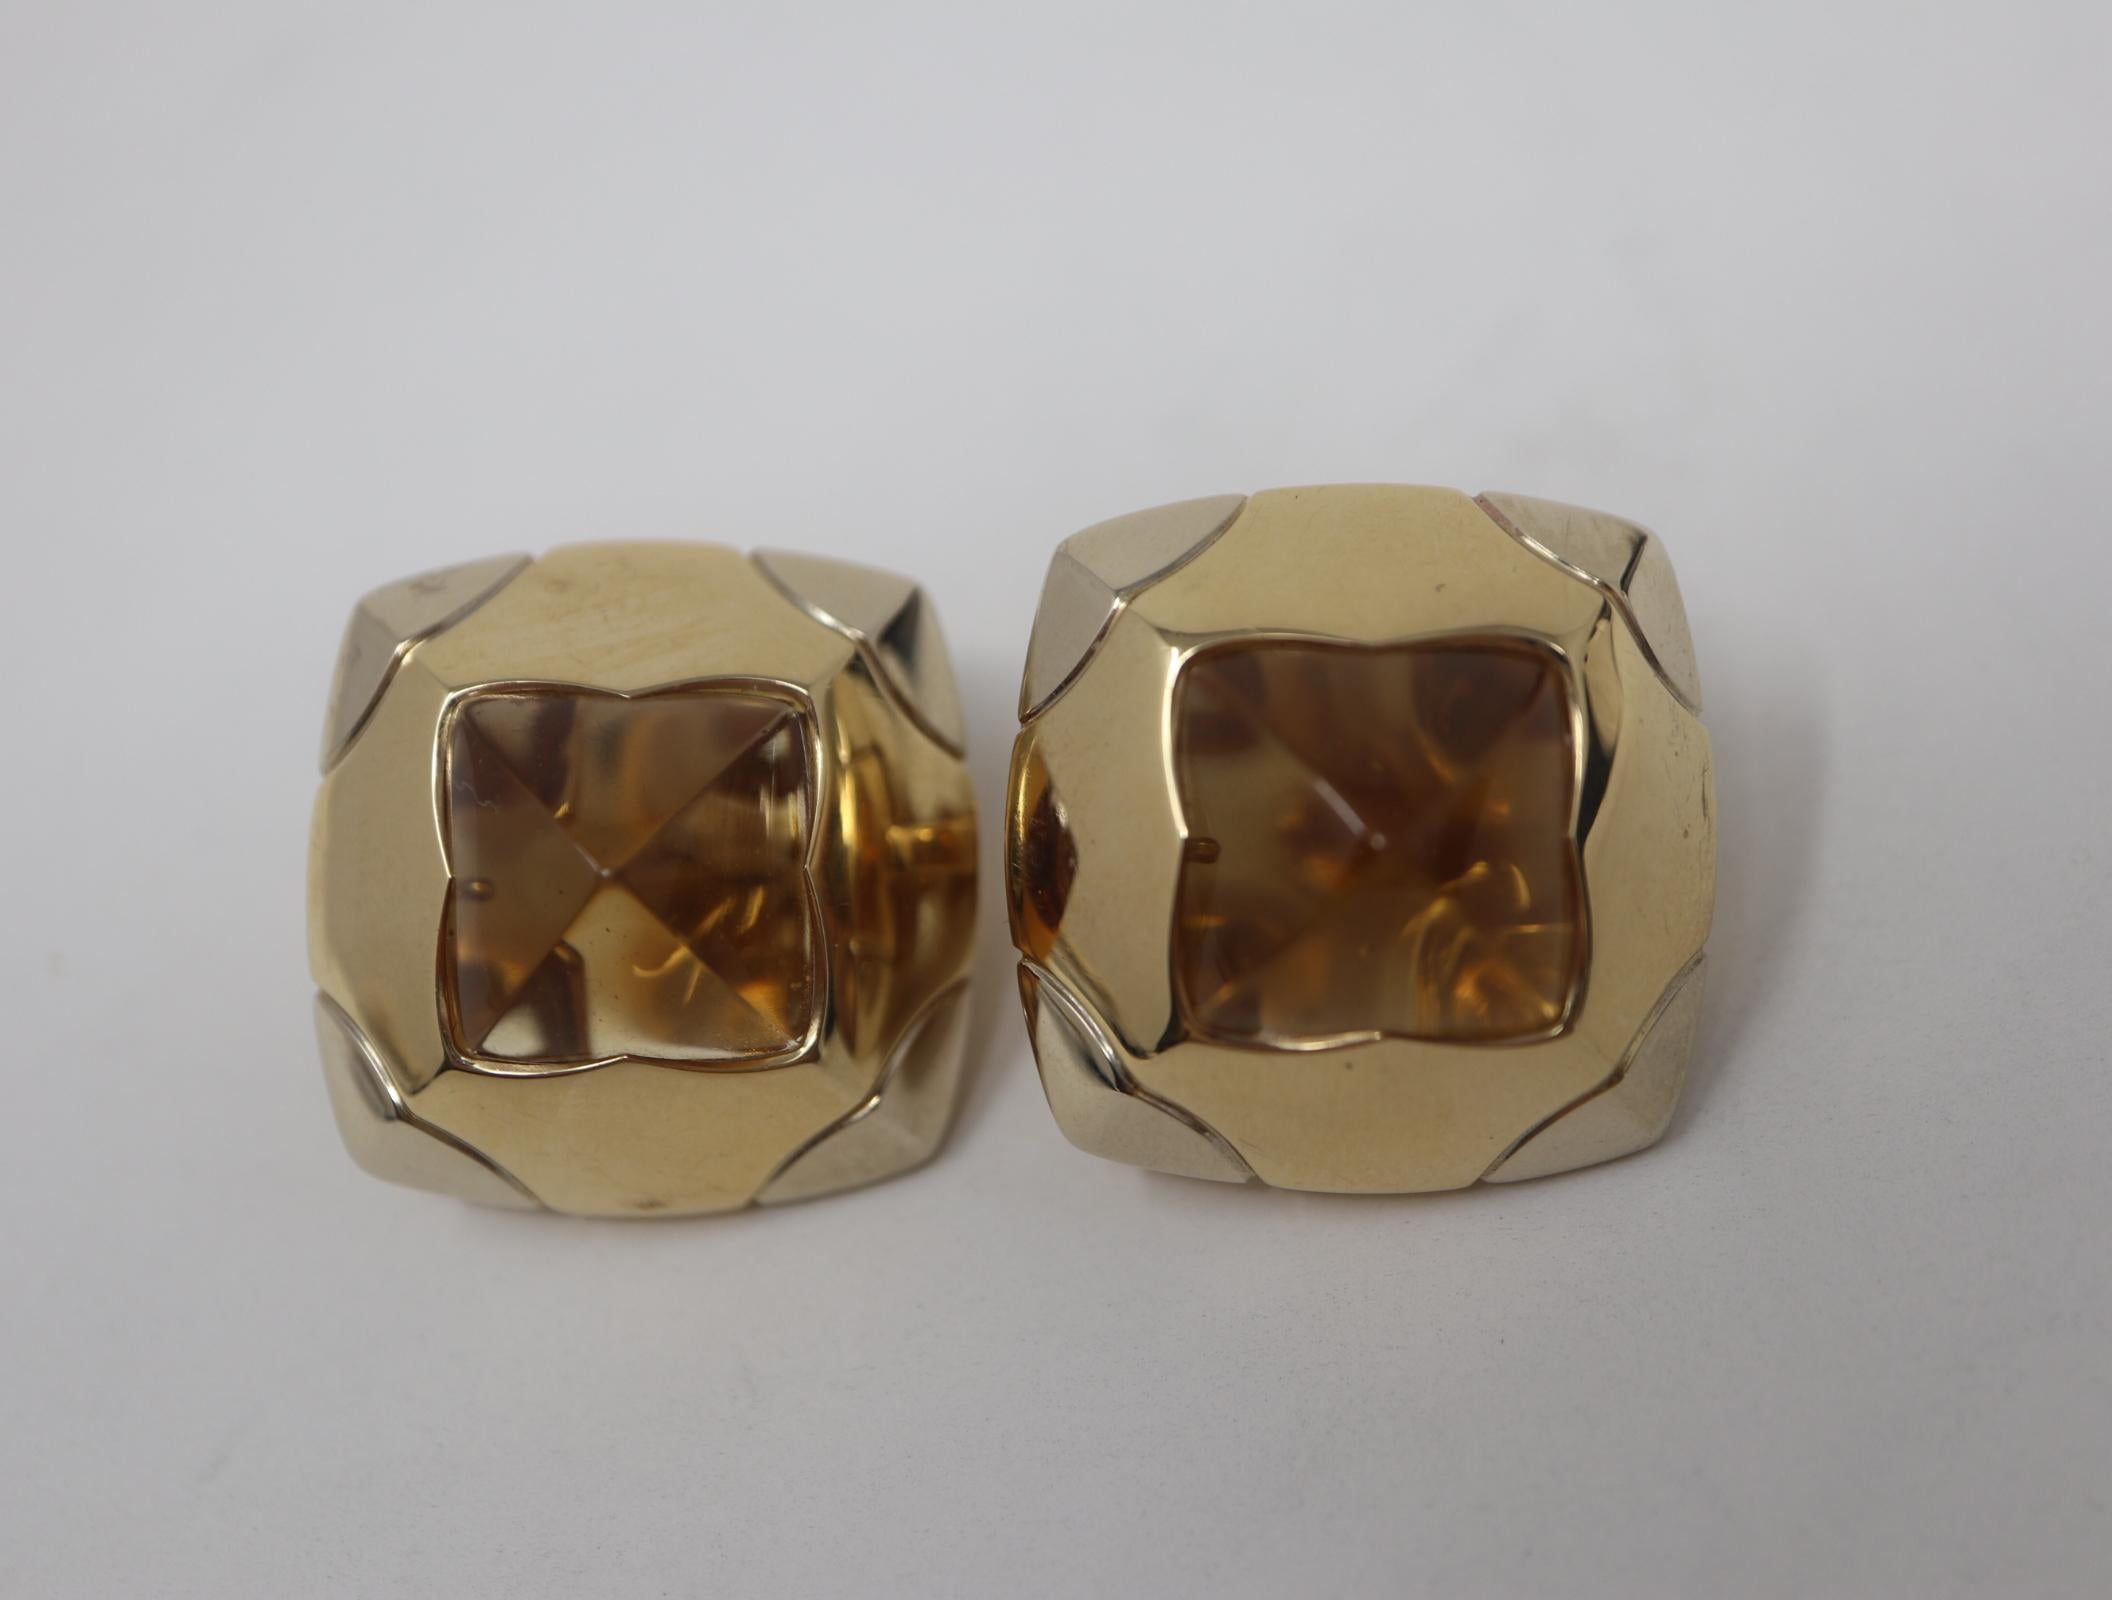 Signed designer Bulgari earrings designed in 18 karat yellow and white gold. The earrings contain four sided cabochon natural Citrine gemstones with post and omega clip backing. The earrings measure 30mm x 30mm. 